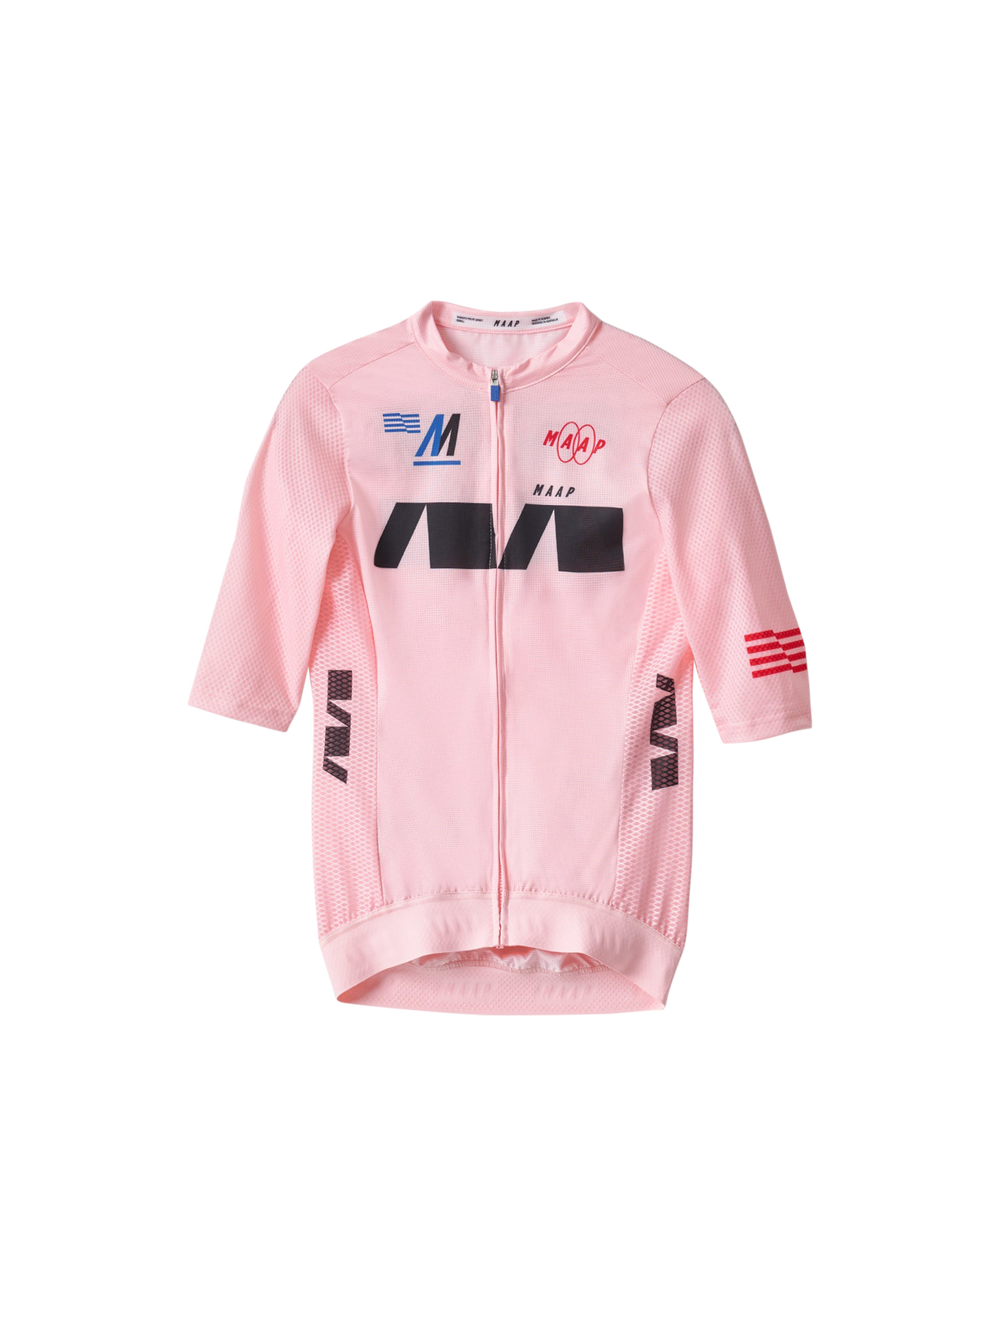 Product Image for Women's Trace Pro Air Jersey